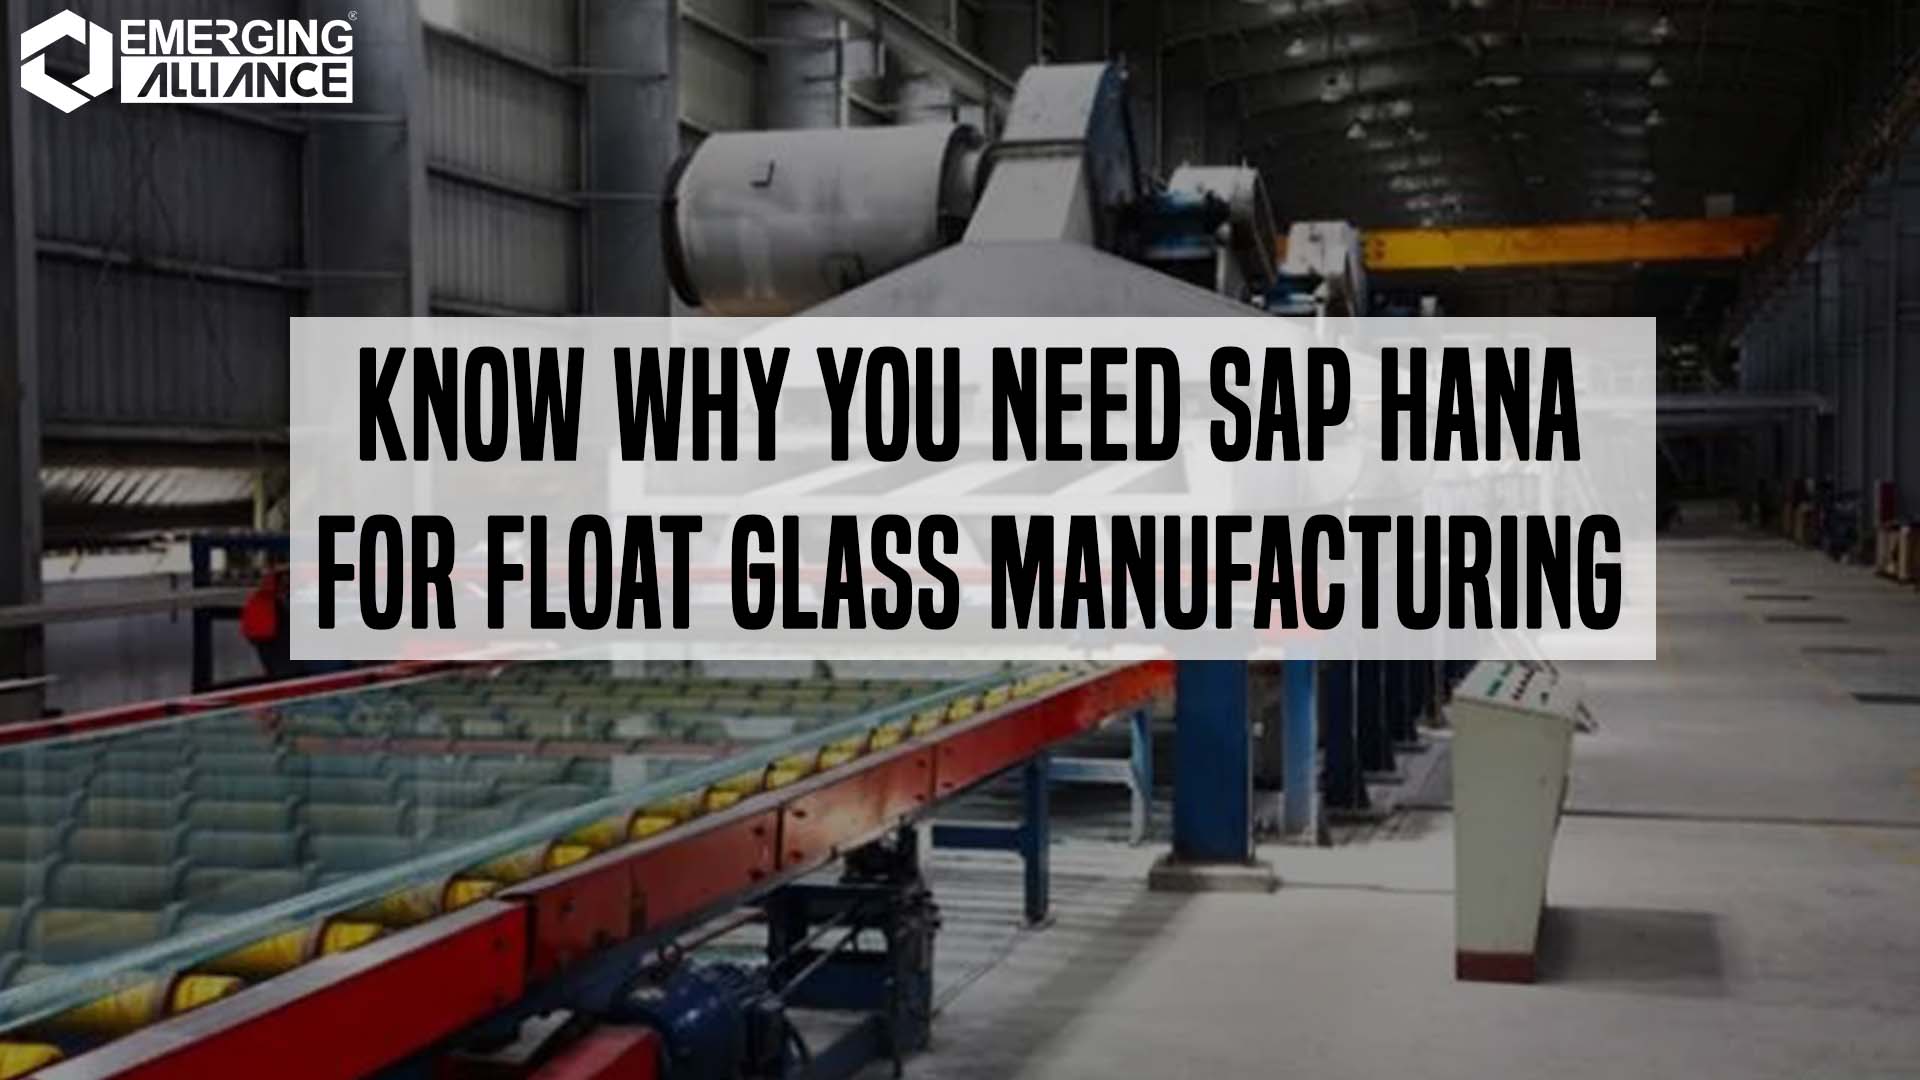 SAP S4 HANA for Float Glass Manufacturing